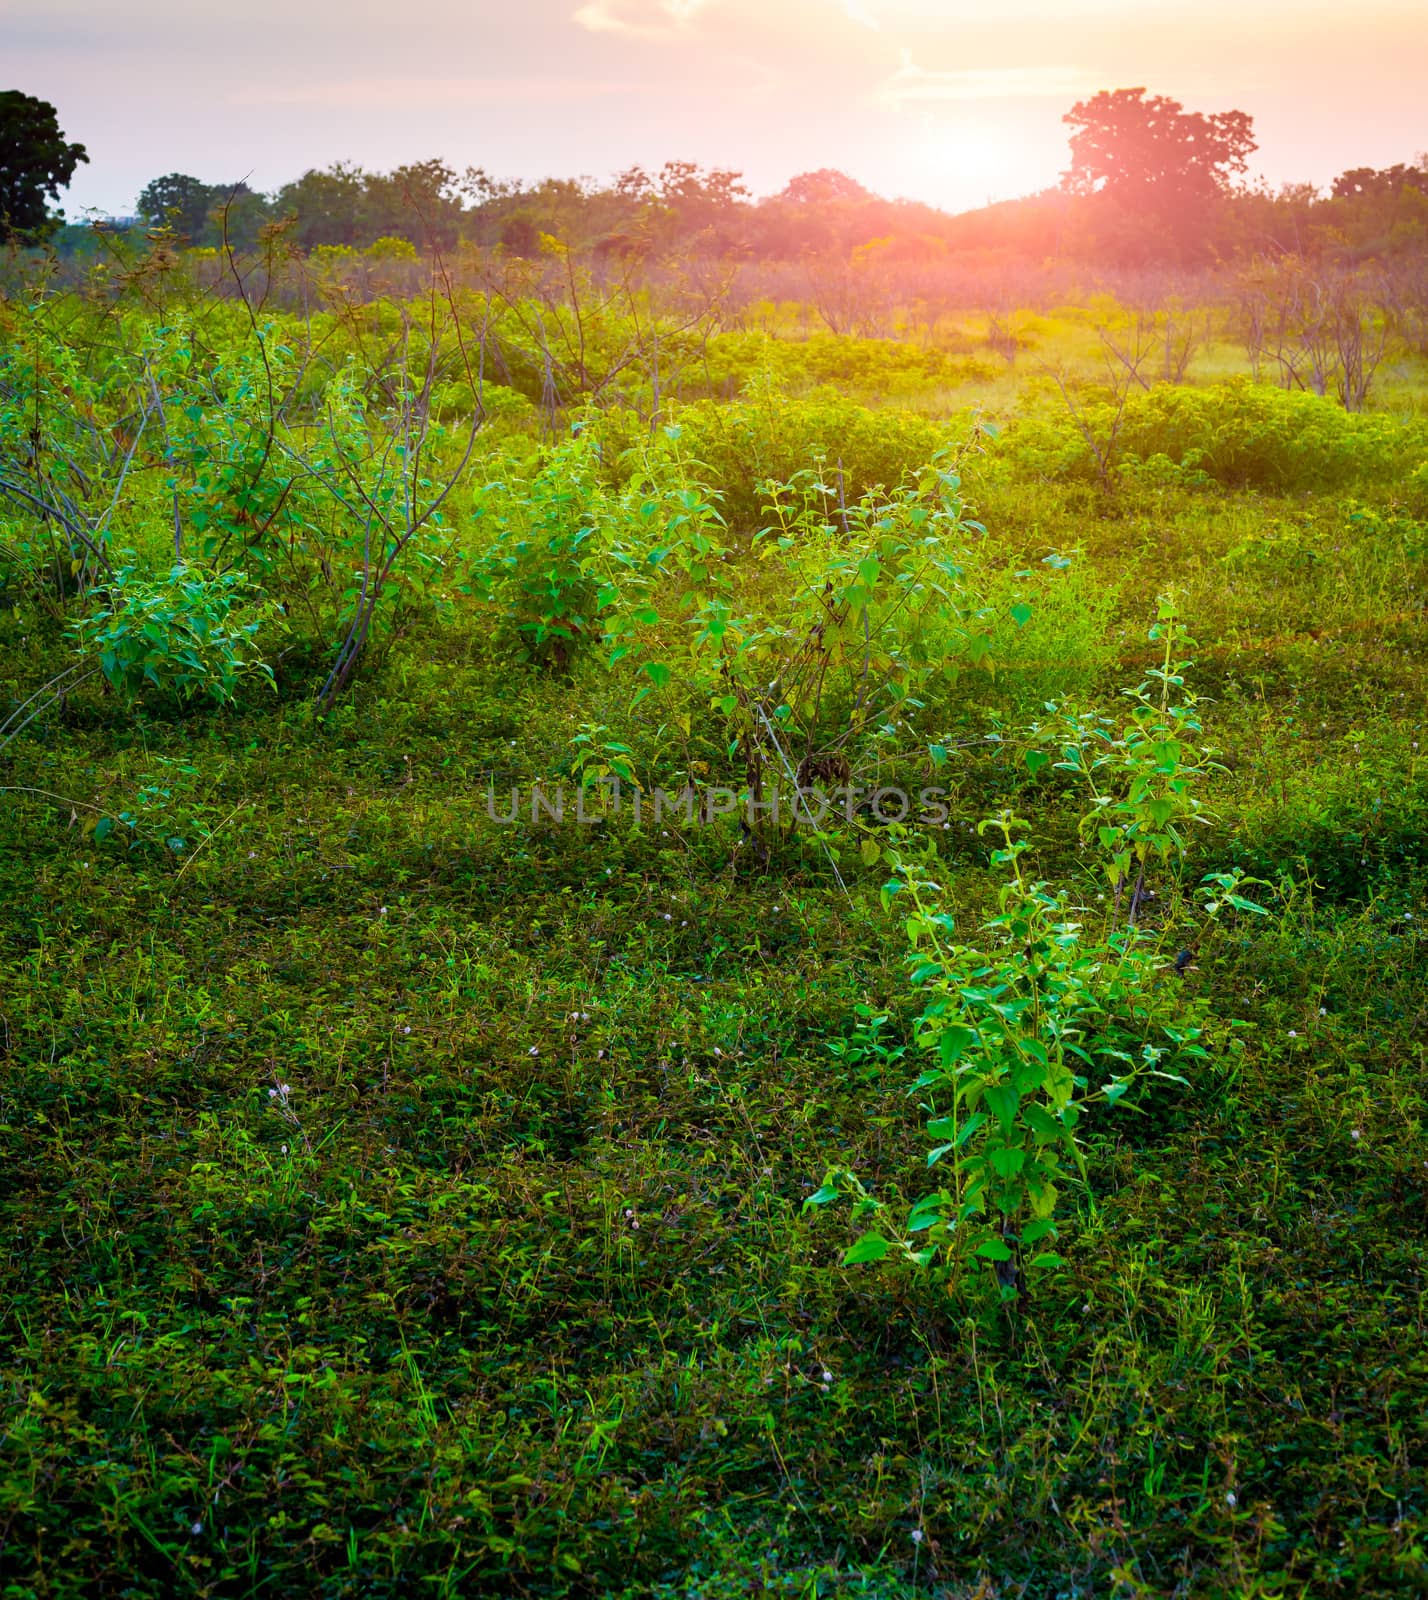 sunset at horizon of tree in grass field